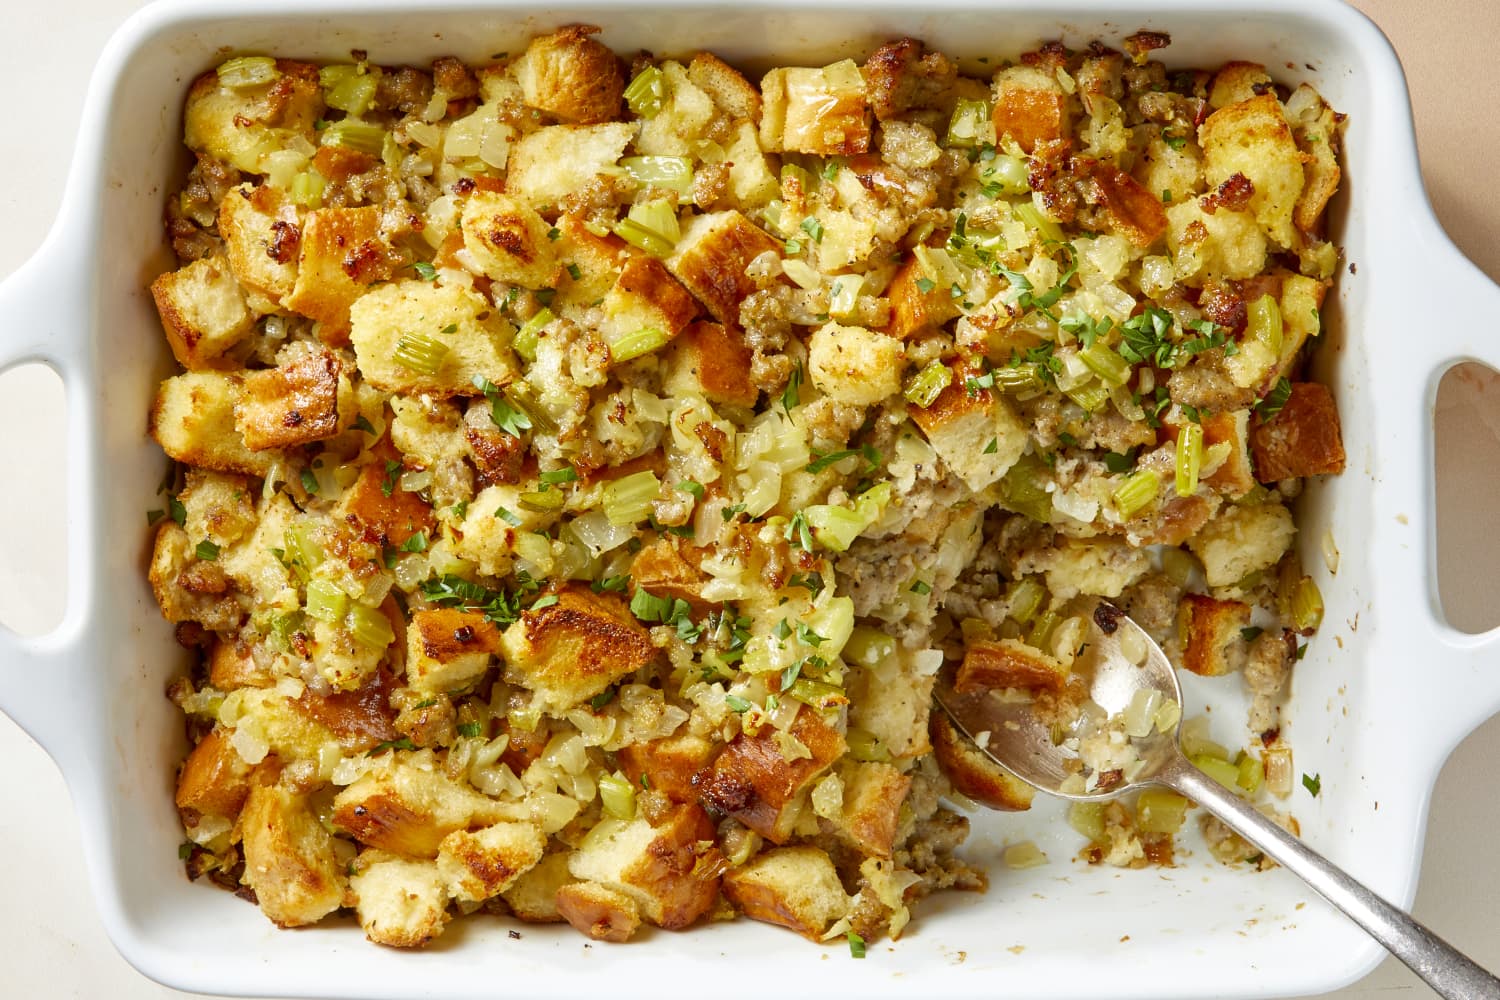 My Mother-in-Law's Sausage and Herb Stuffing Recipe | The Kitchn